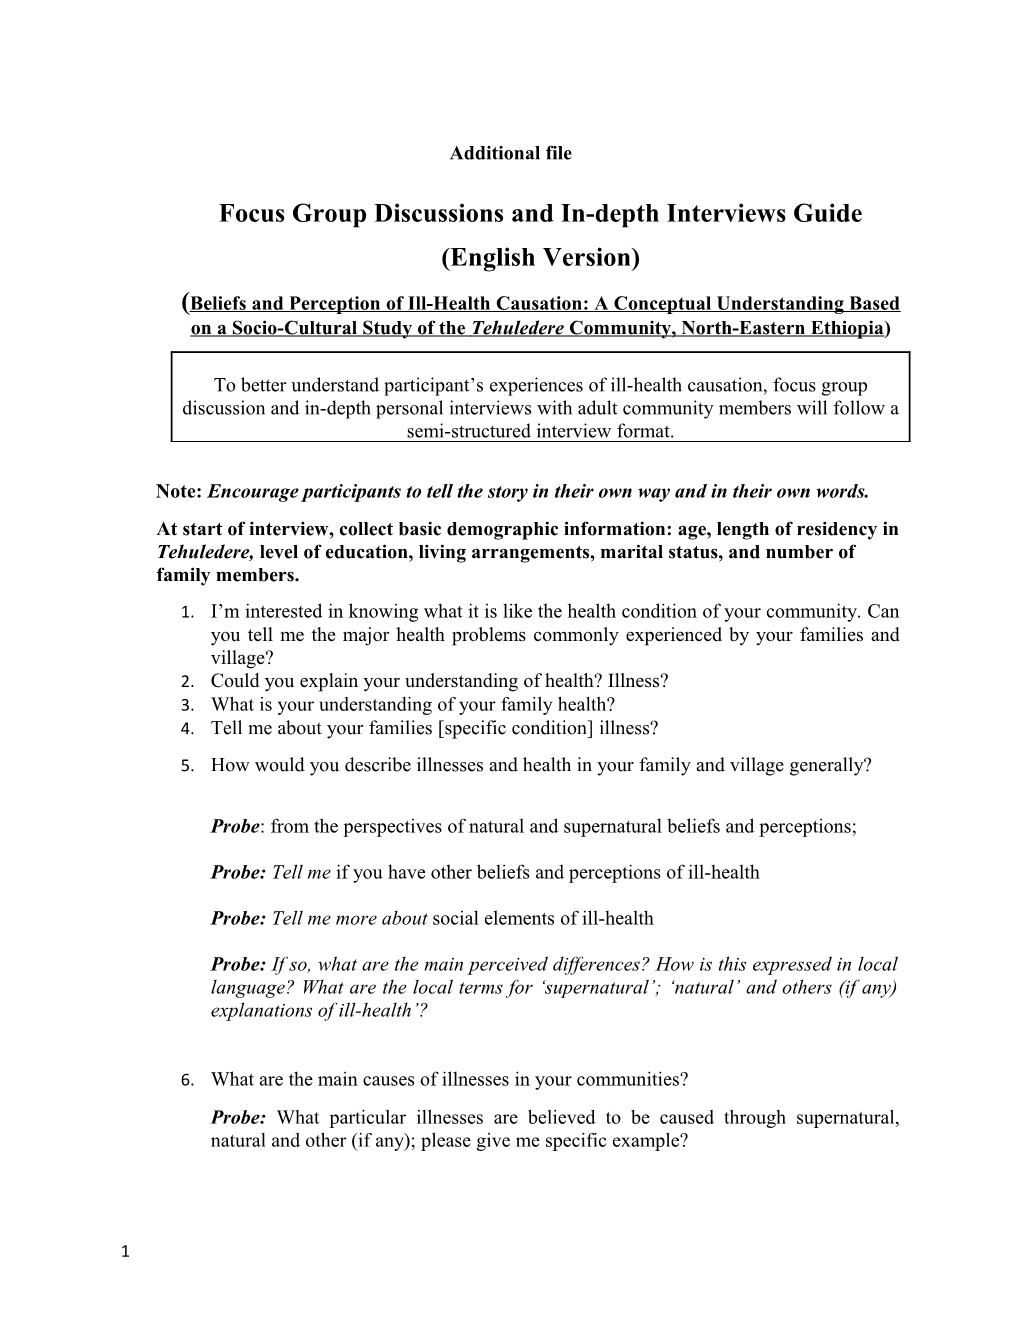 Focus Group Discussions and In-Depth Interviews Guide